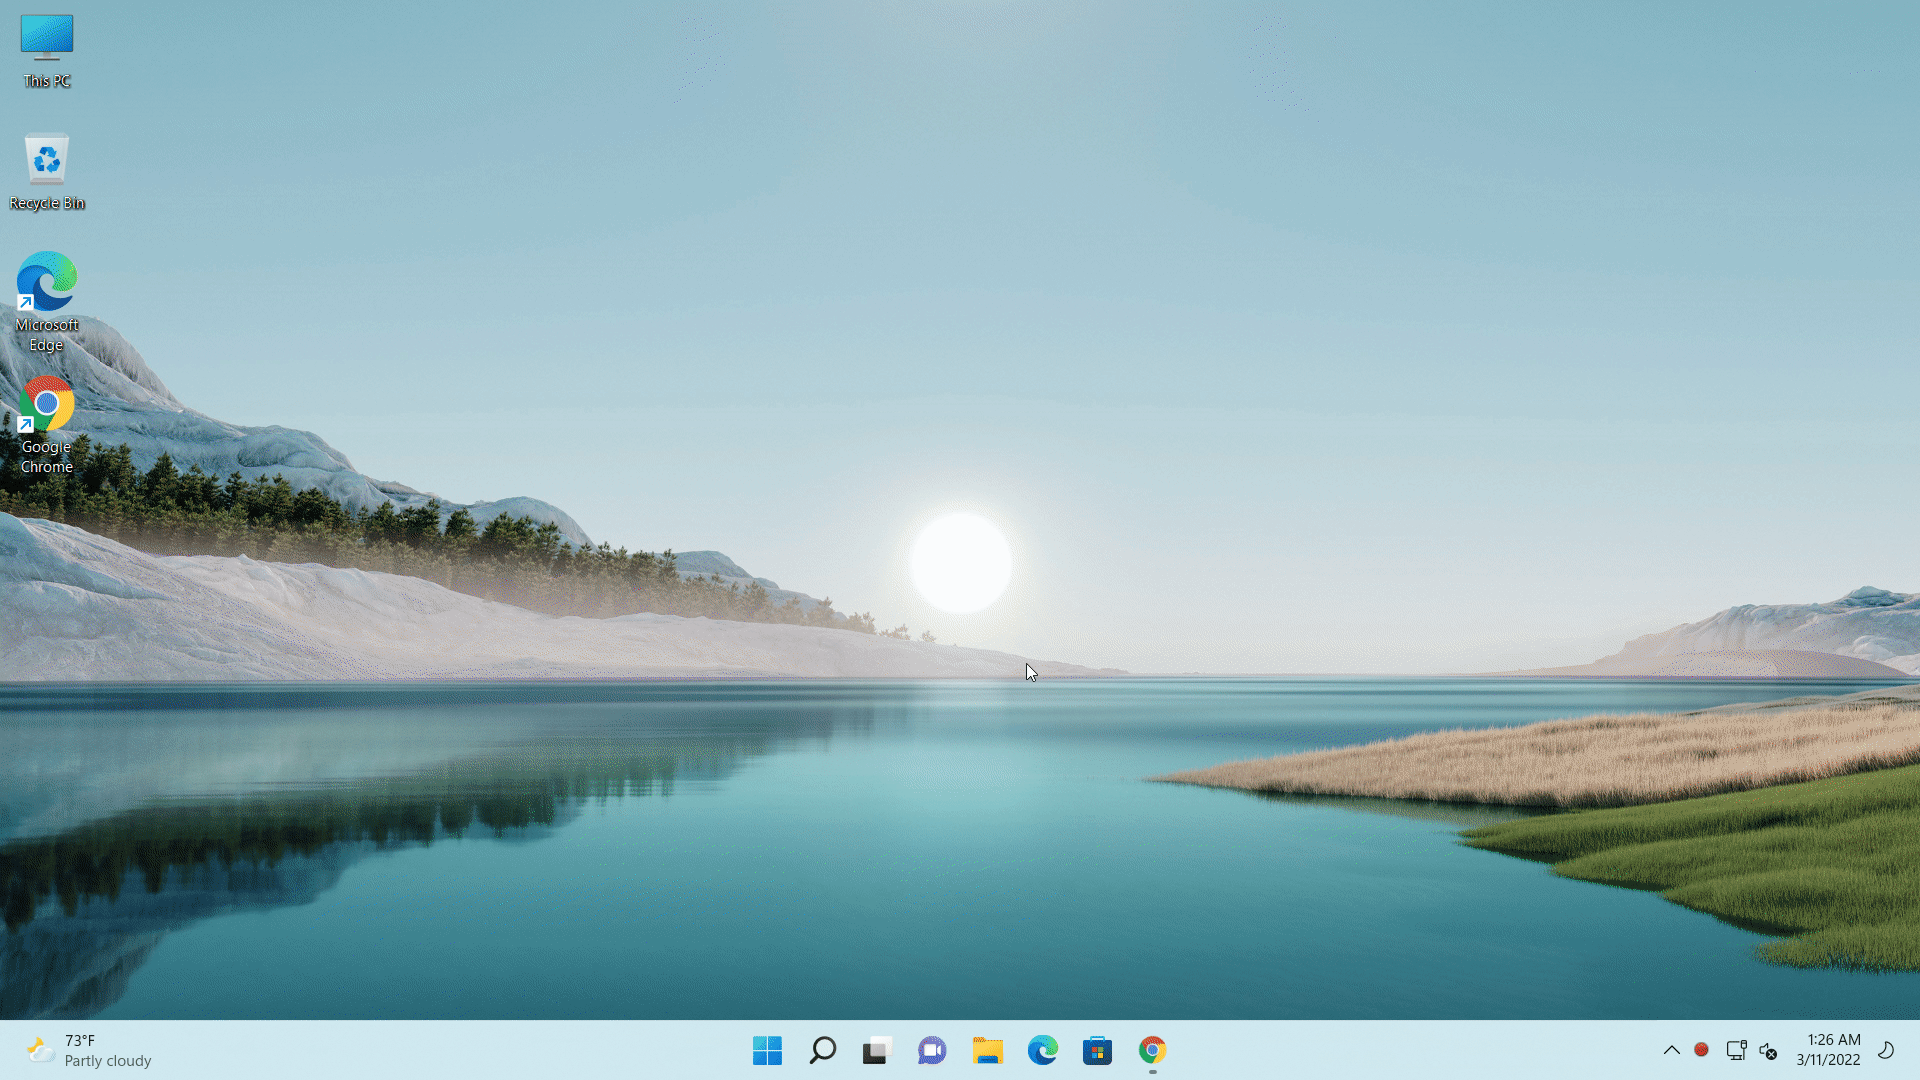 For rearranging desktops, drag a virtual desktop and put it before the other one